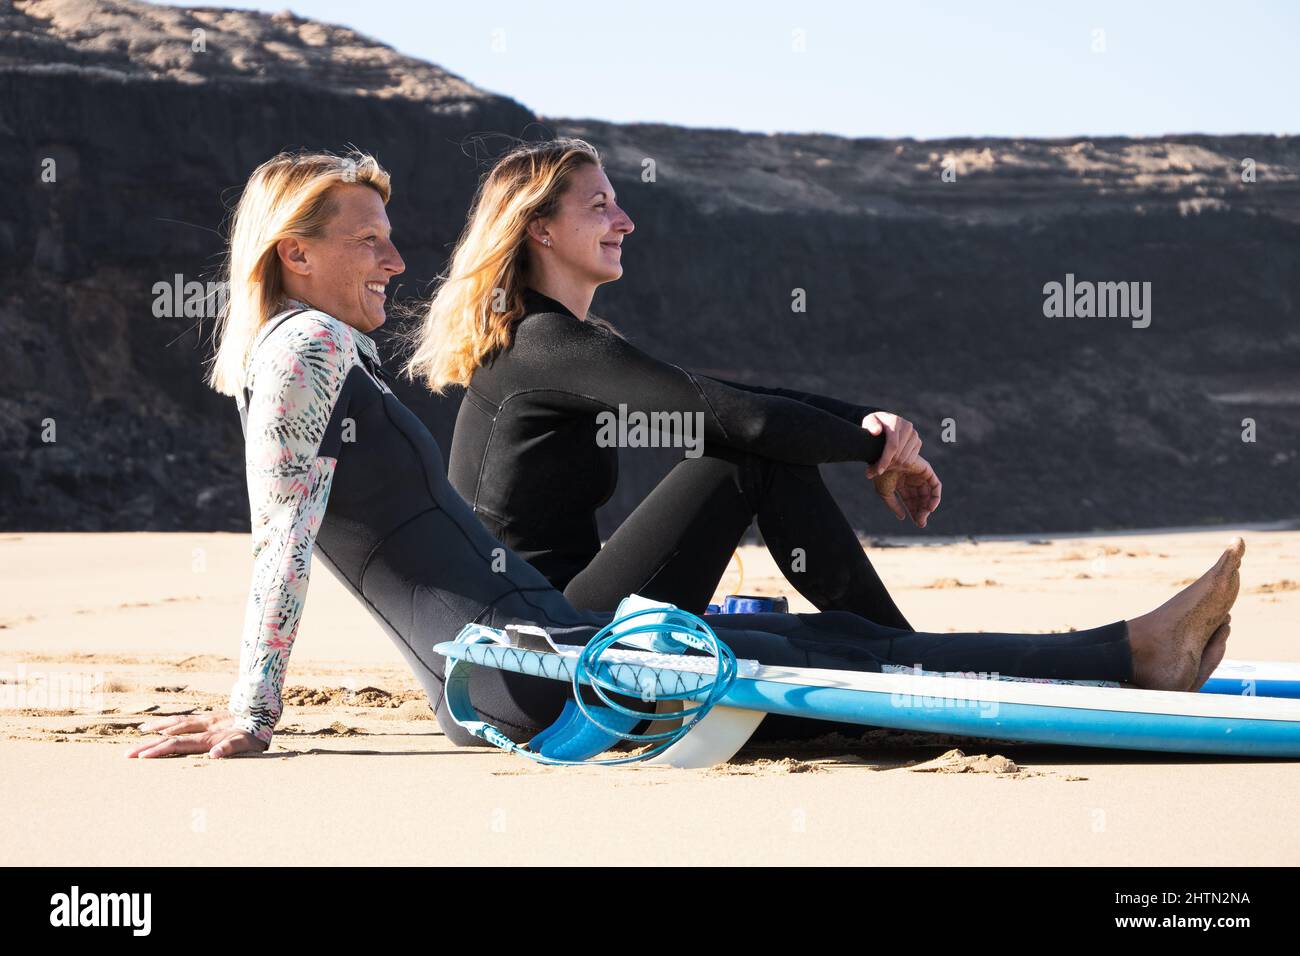 2 Caucasian surfers sitting on the beach. They are smiling looking to the sea. Sport, healthy lifestyle, friendship concept. Stock Photo